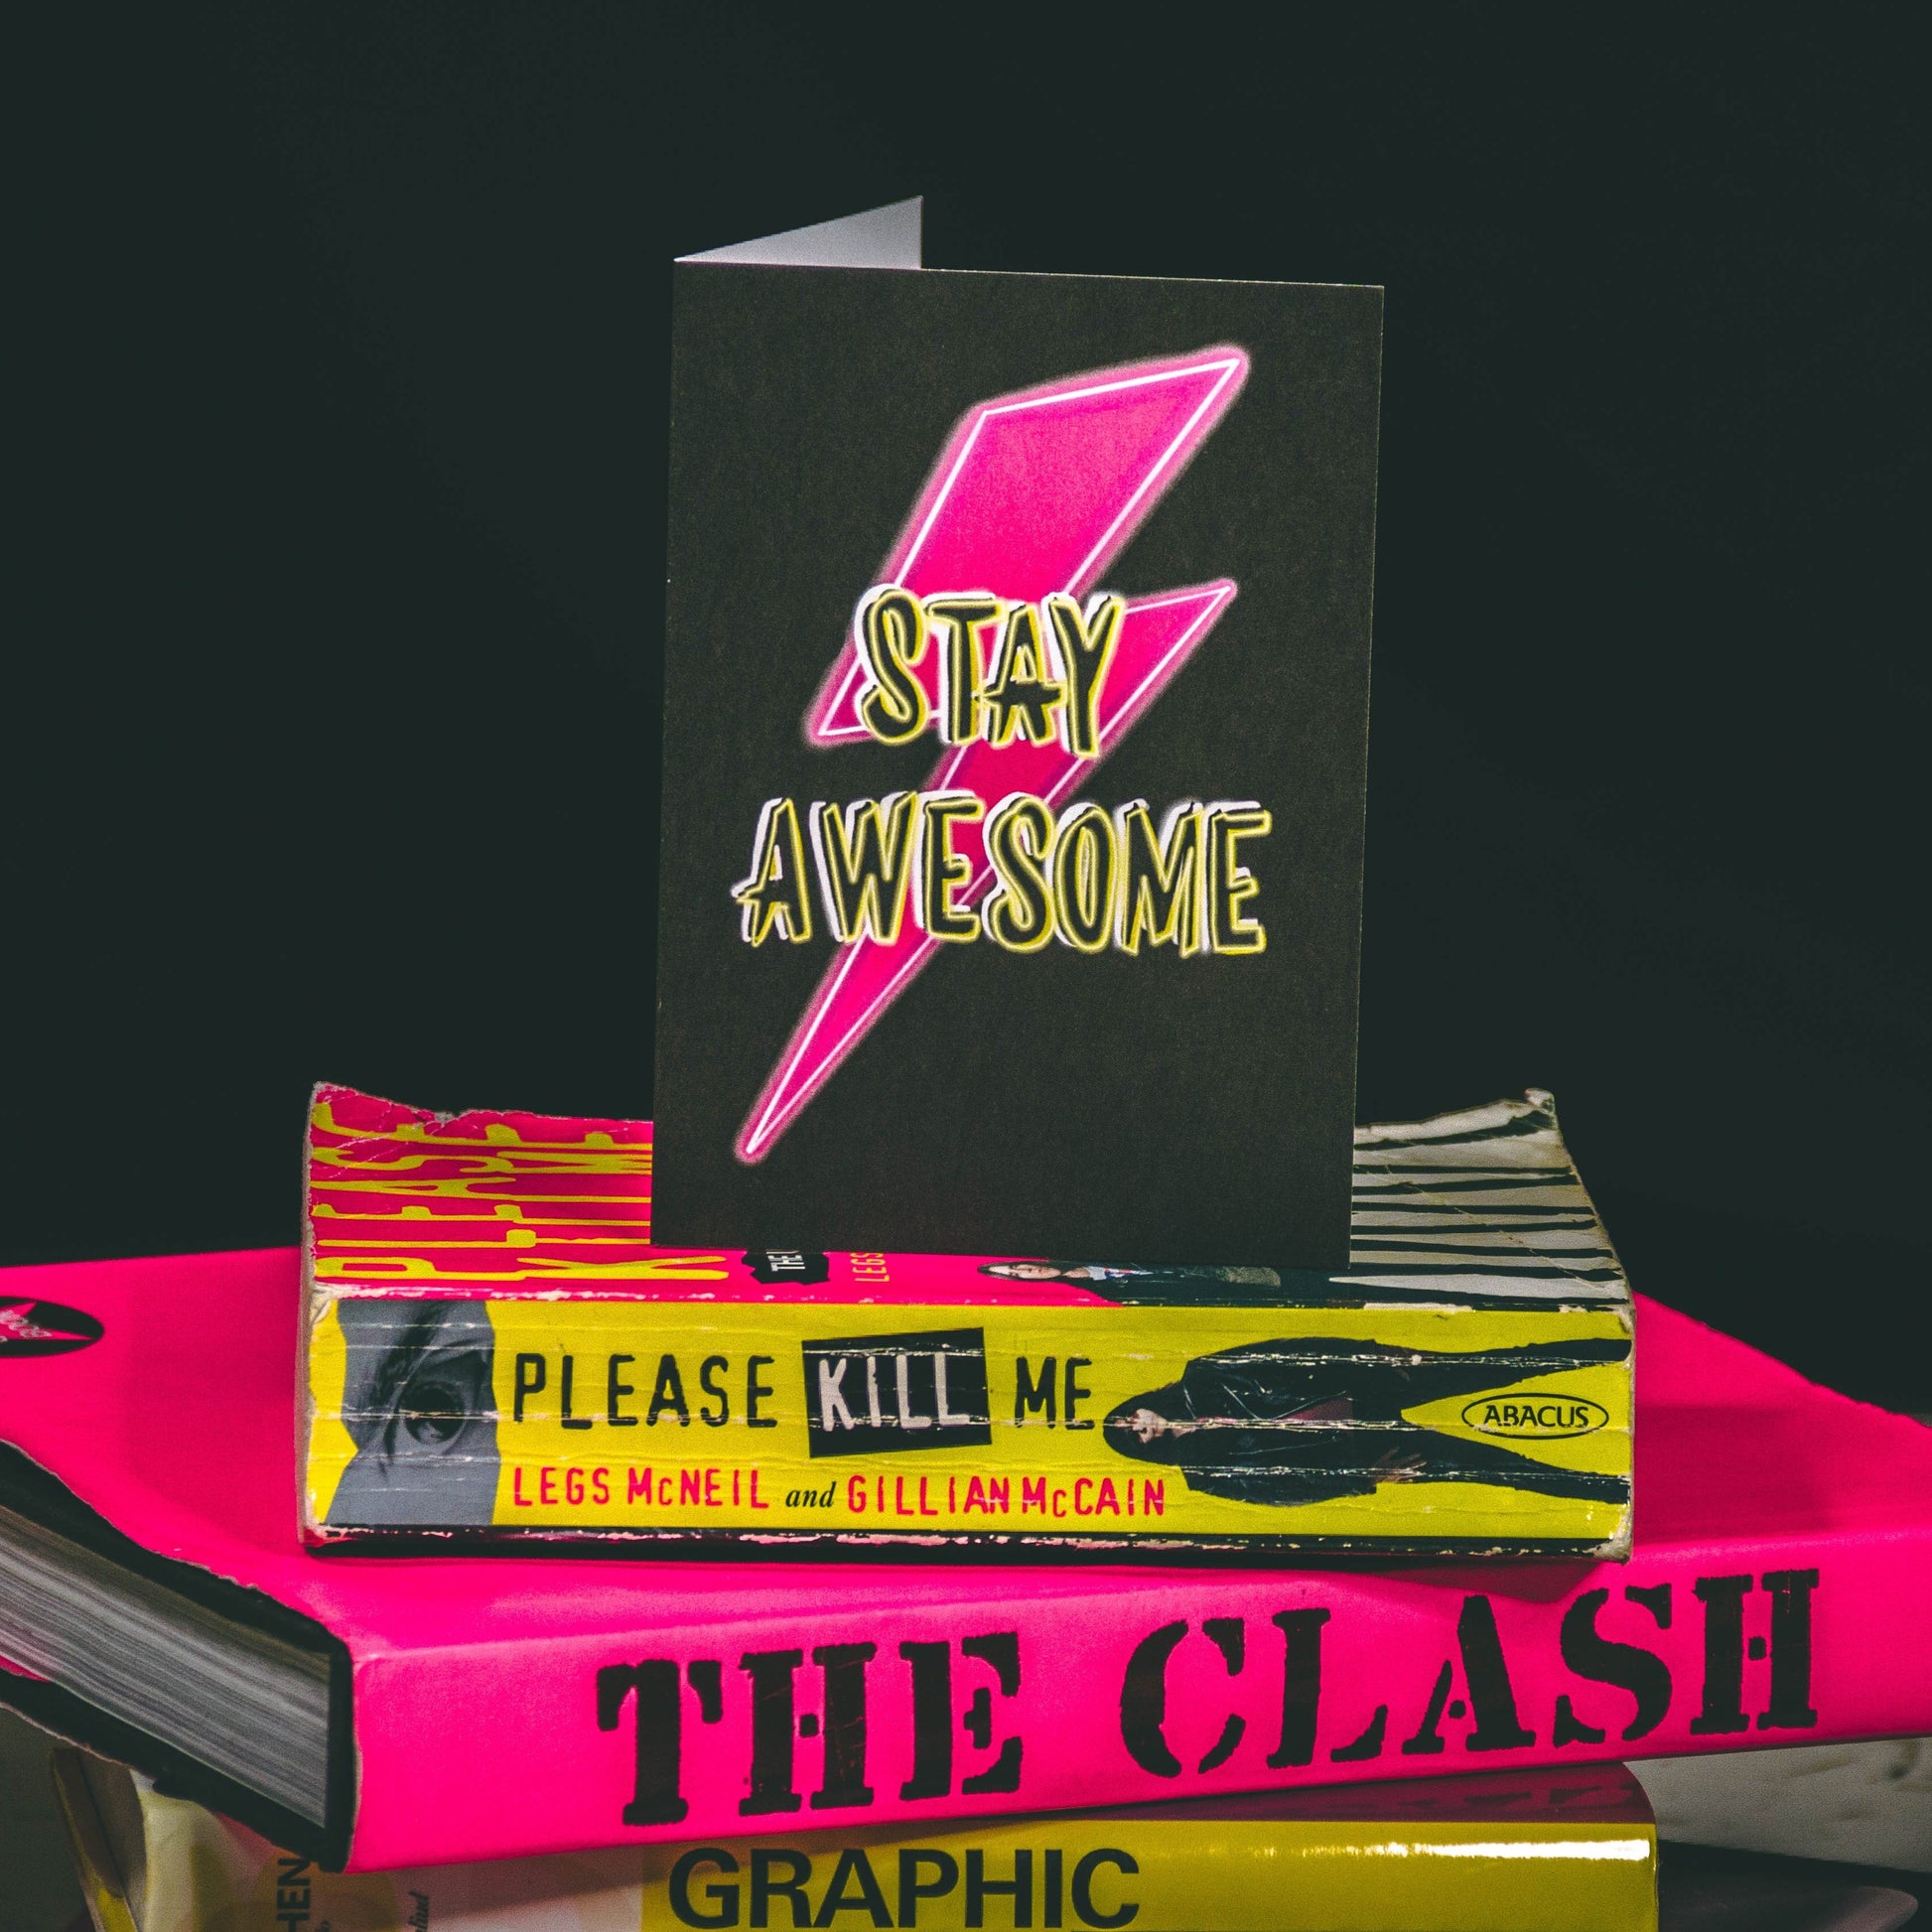 A6 Black Greetings Card With Pink Bowie Lightening Bolt and Stay Awesome Slogan by  Wayward 